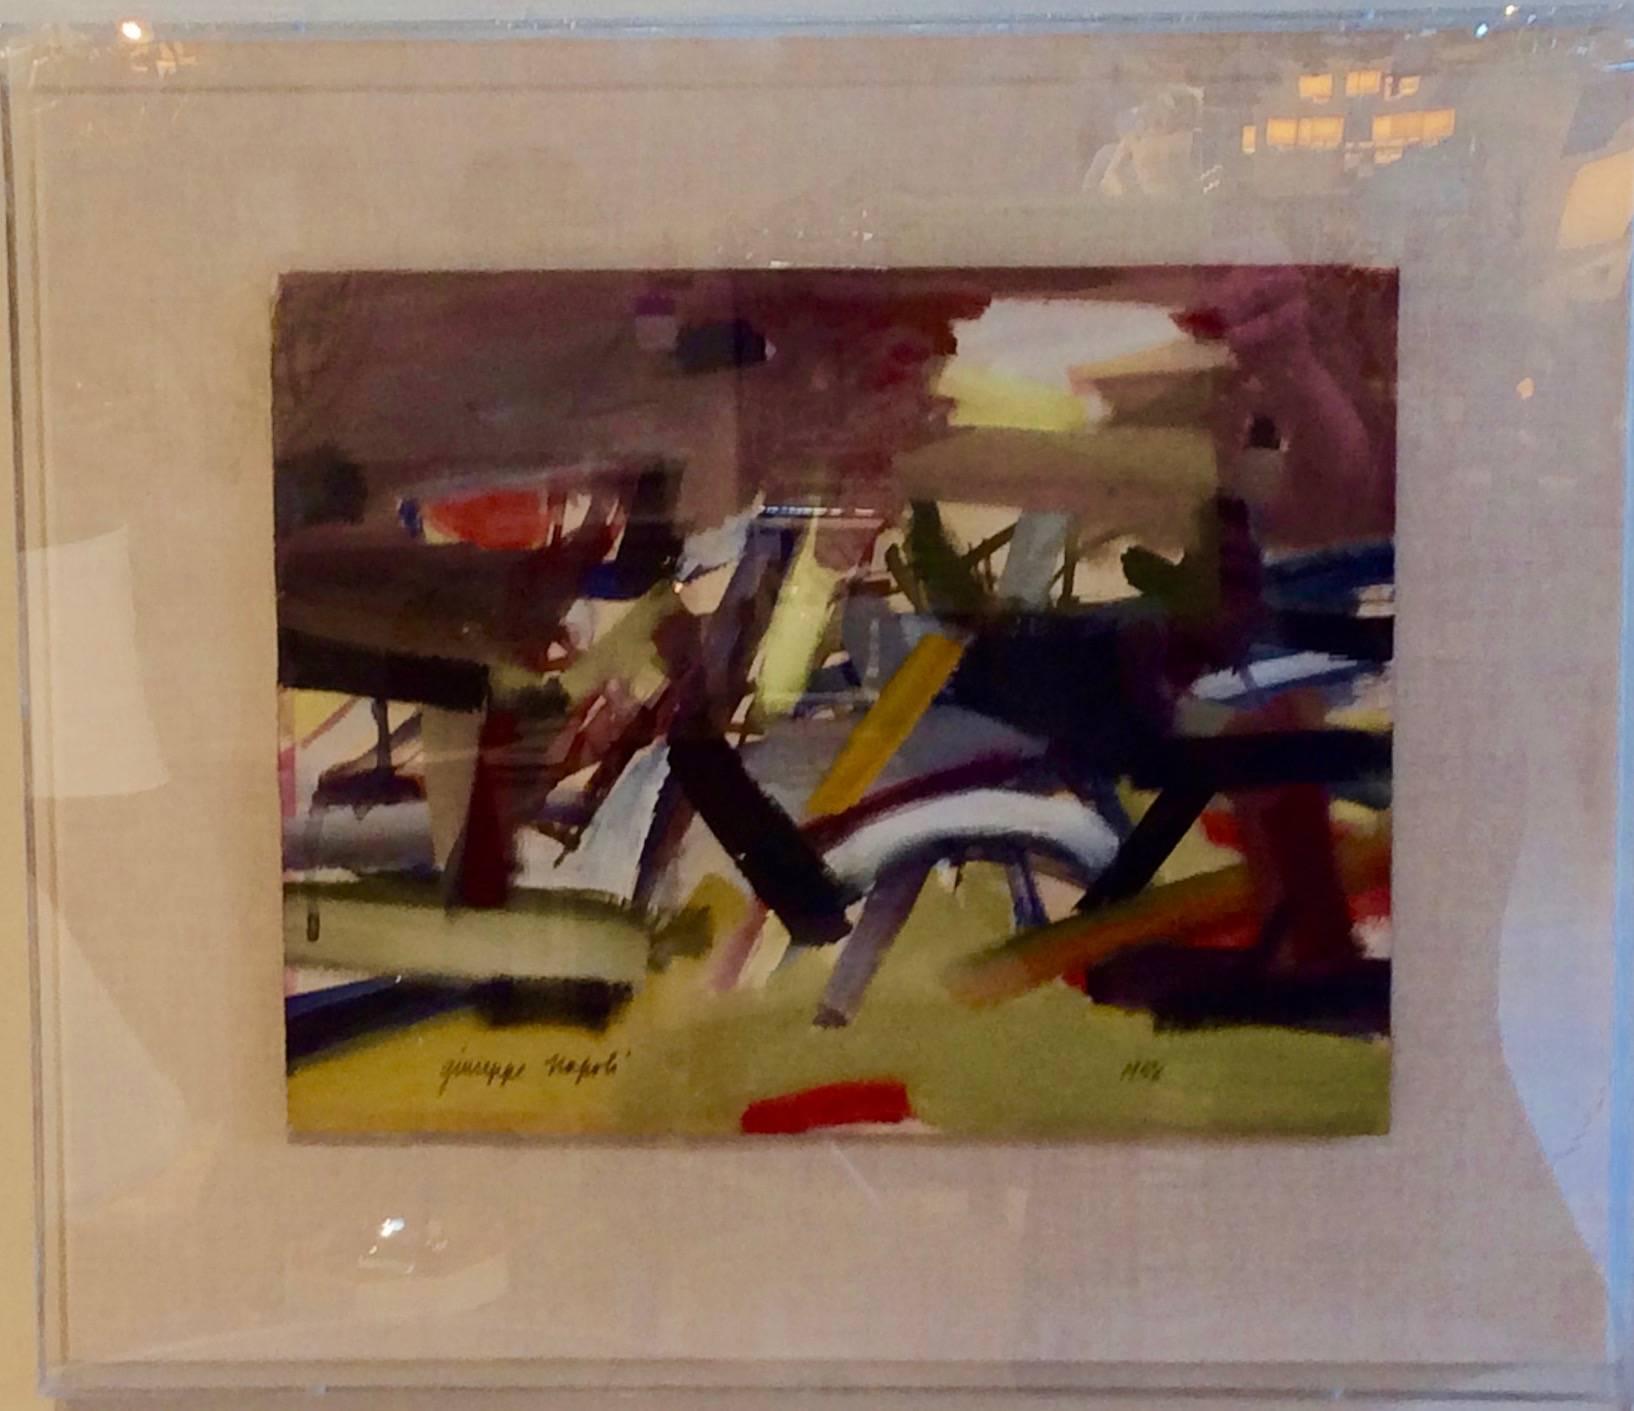 20th Century Mid-Century Modern Abstract Painting Signed by Giuseppe Napoli, Dated 1958 For Sale